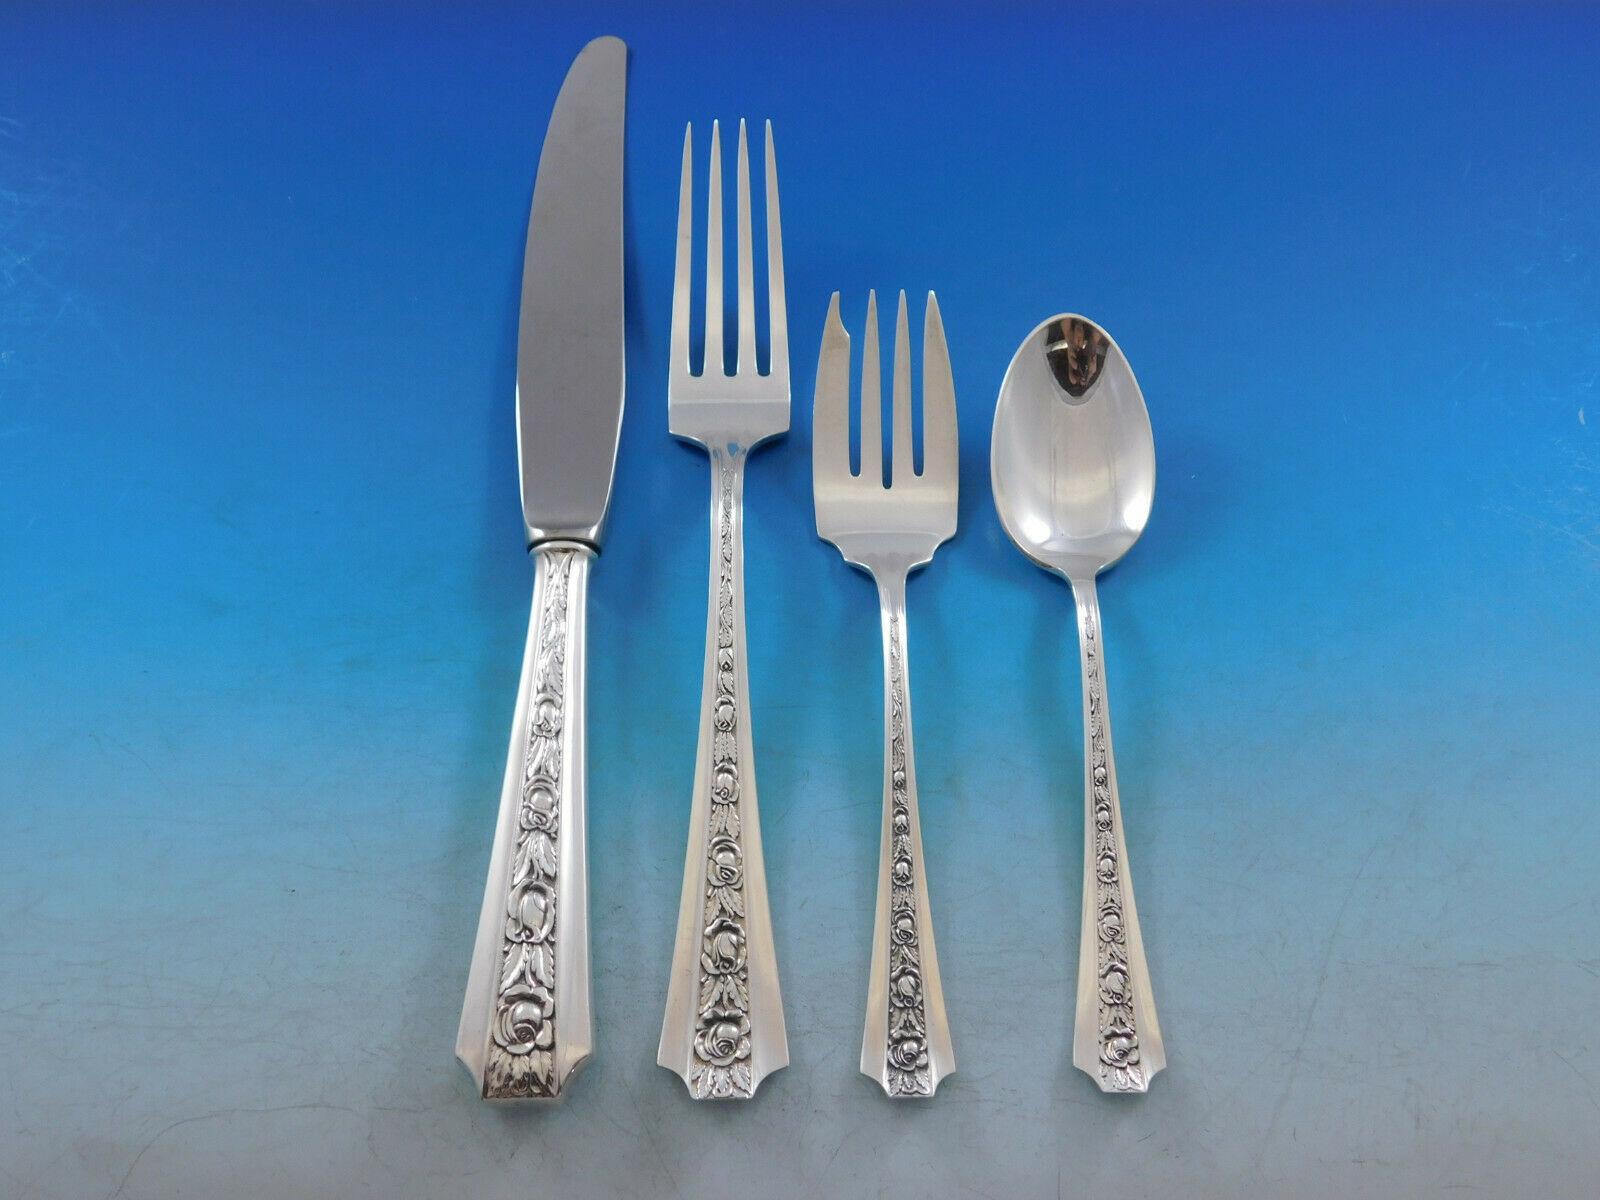 Dinner Size Talisman Rose by Frank M. Whiting sterling silver flatware set, 78 pieces. This set includes:

12 Dinner Size Knives, 9 5/8